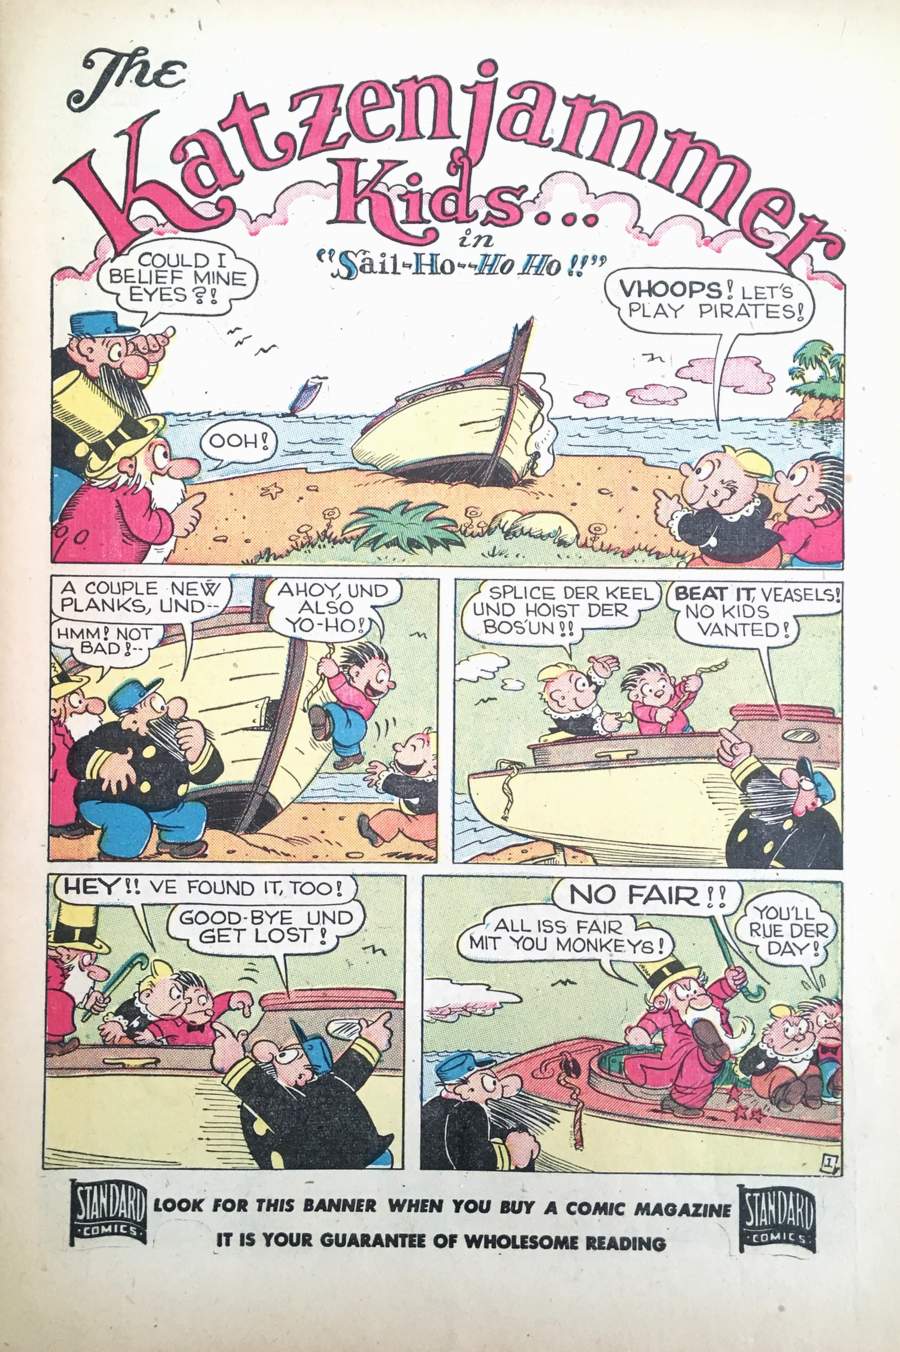 Opening page from “The Katzenjammer Kids,” #16, Spring 1951